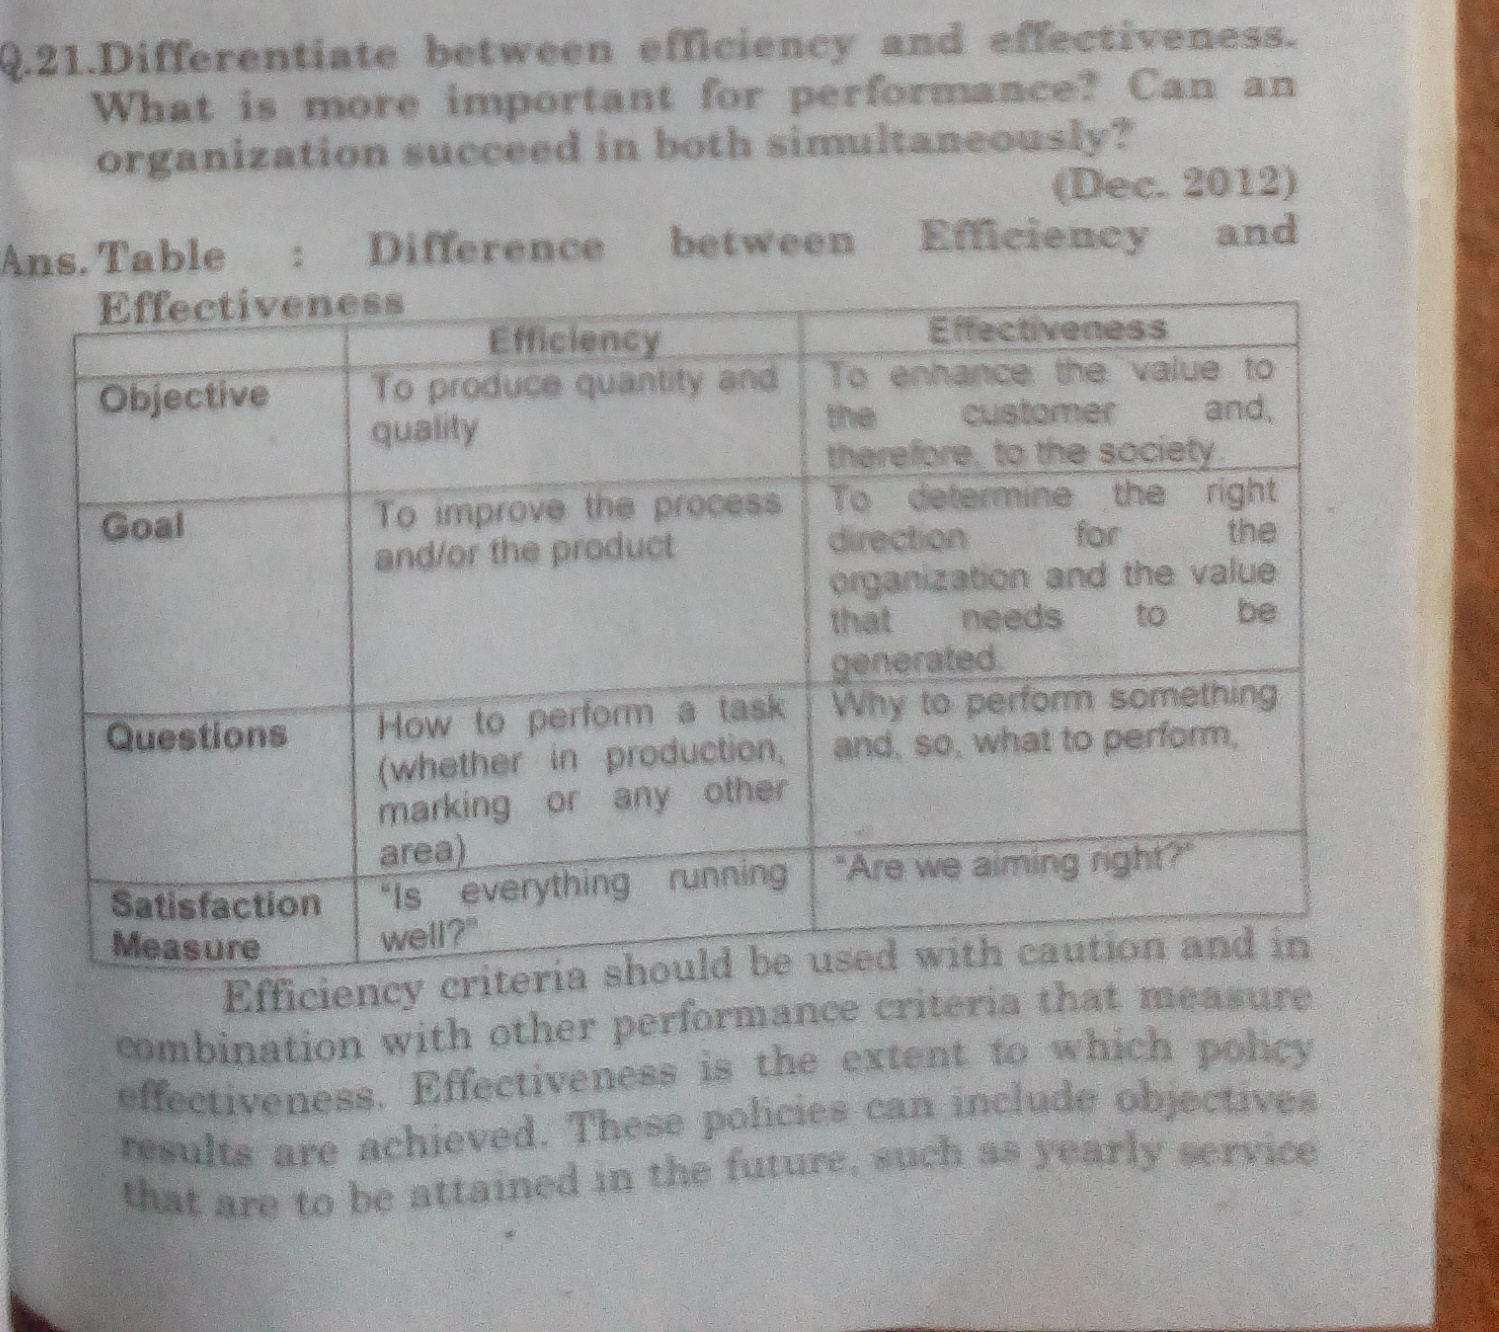 Diffrence Between Efficiency and Effectiveness.(BCA FIRST SEMESTER)-IMG_20191007_080238.jpg